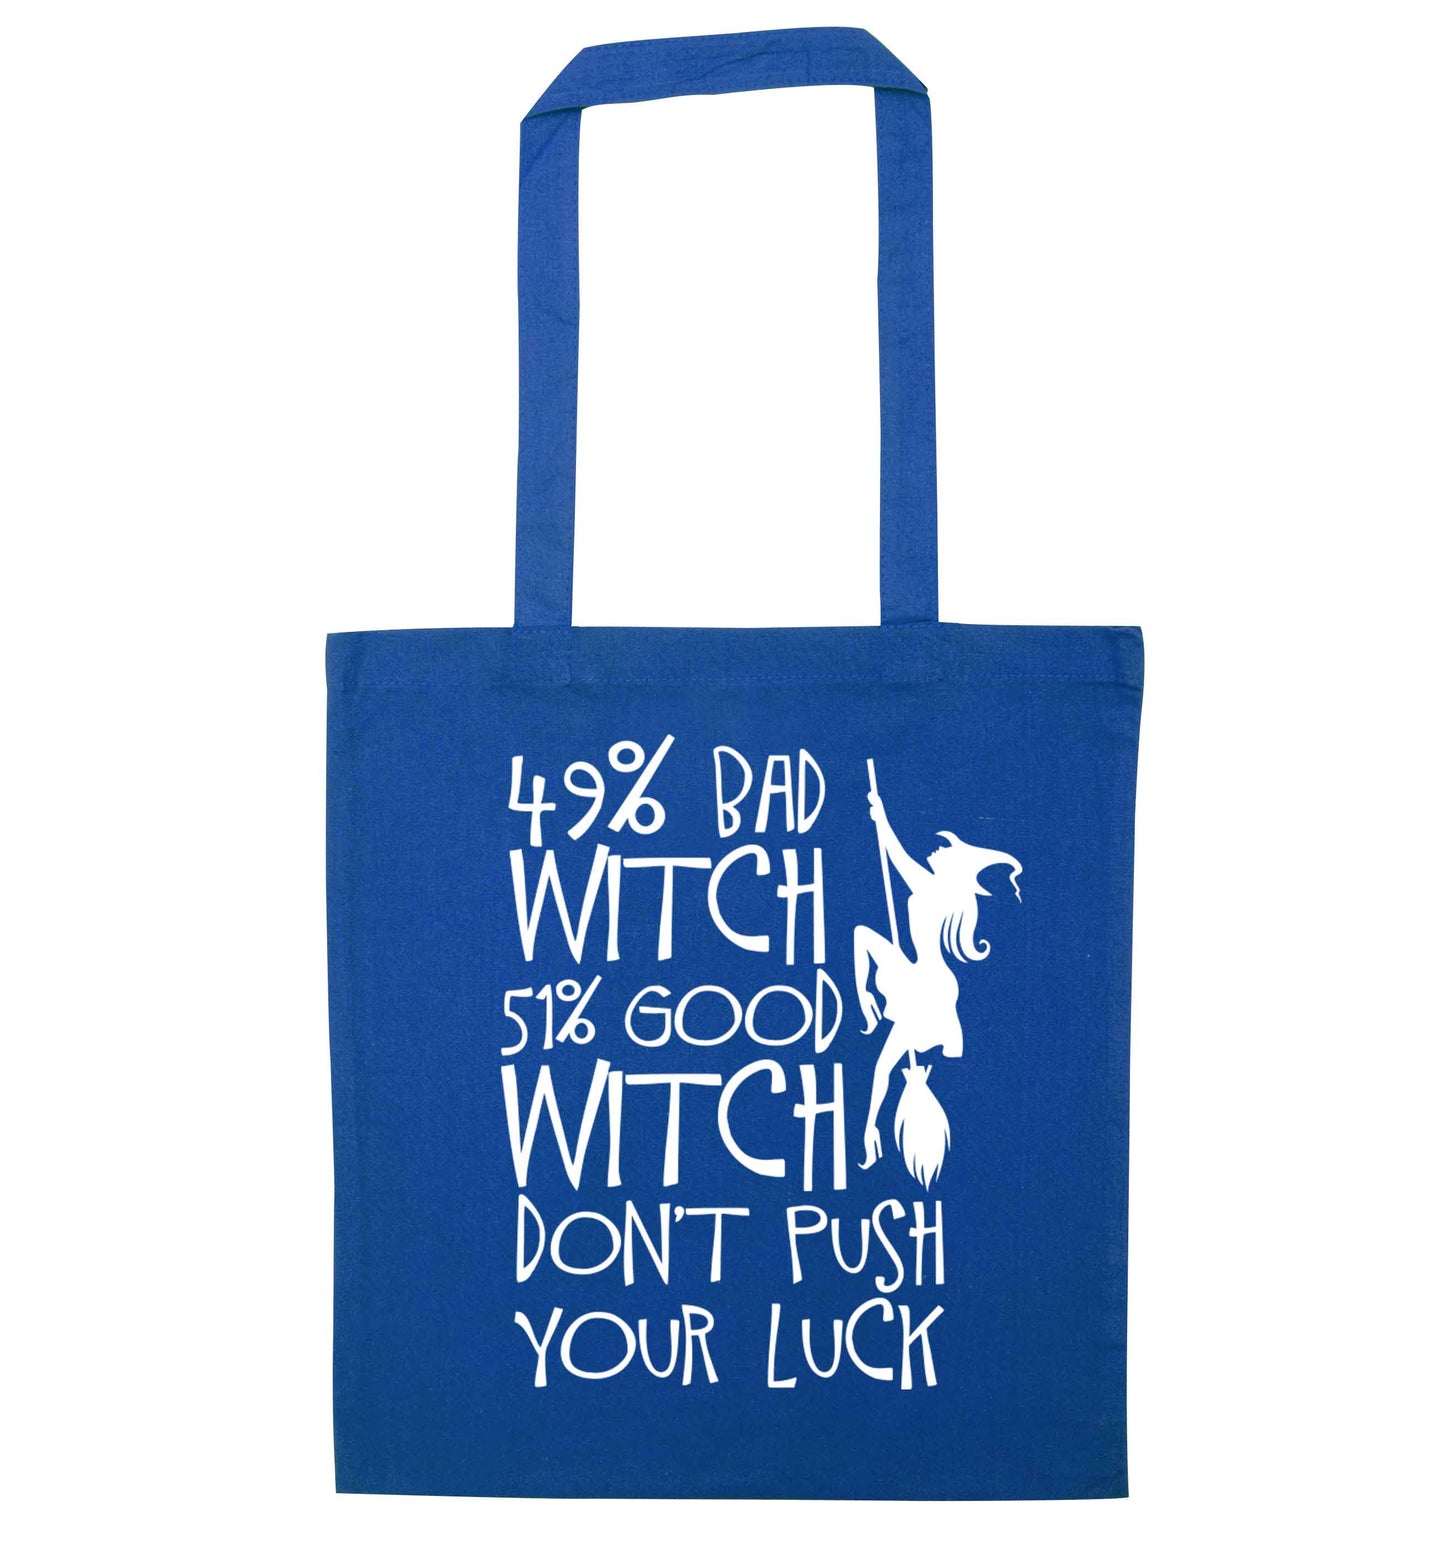 49% bad witch 51% good witch don't push your luck blue tote bag